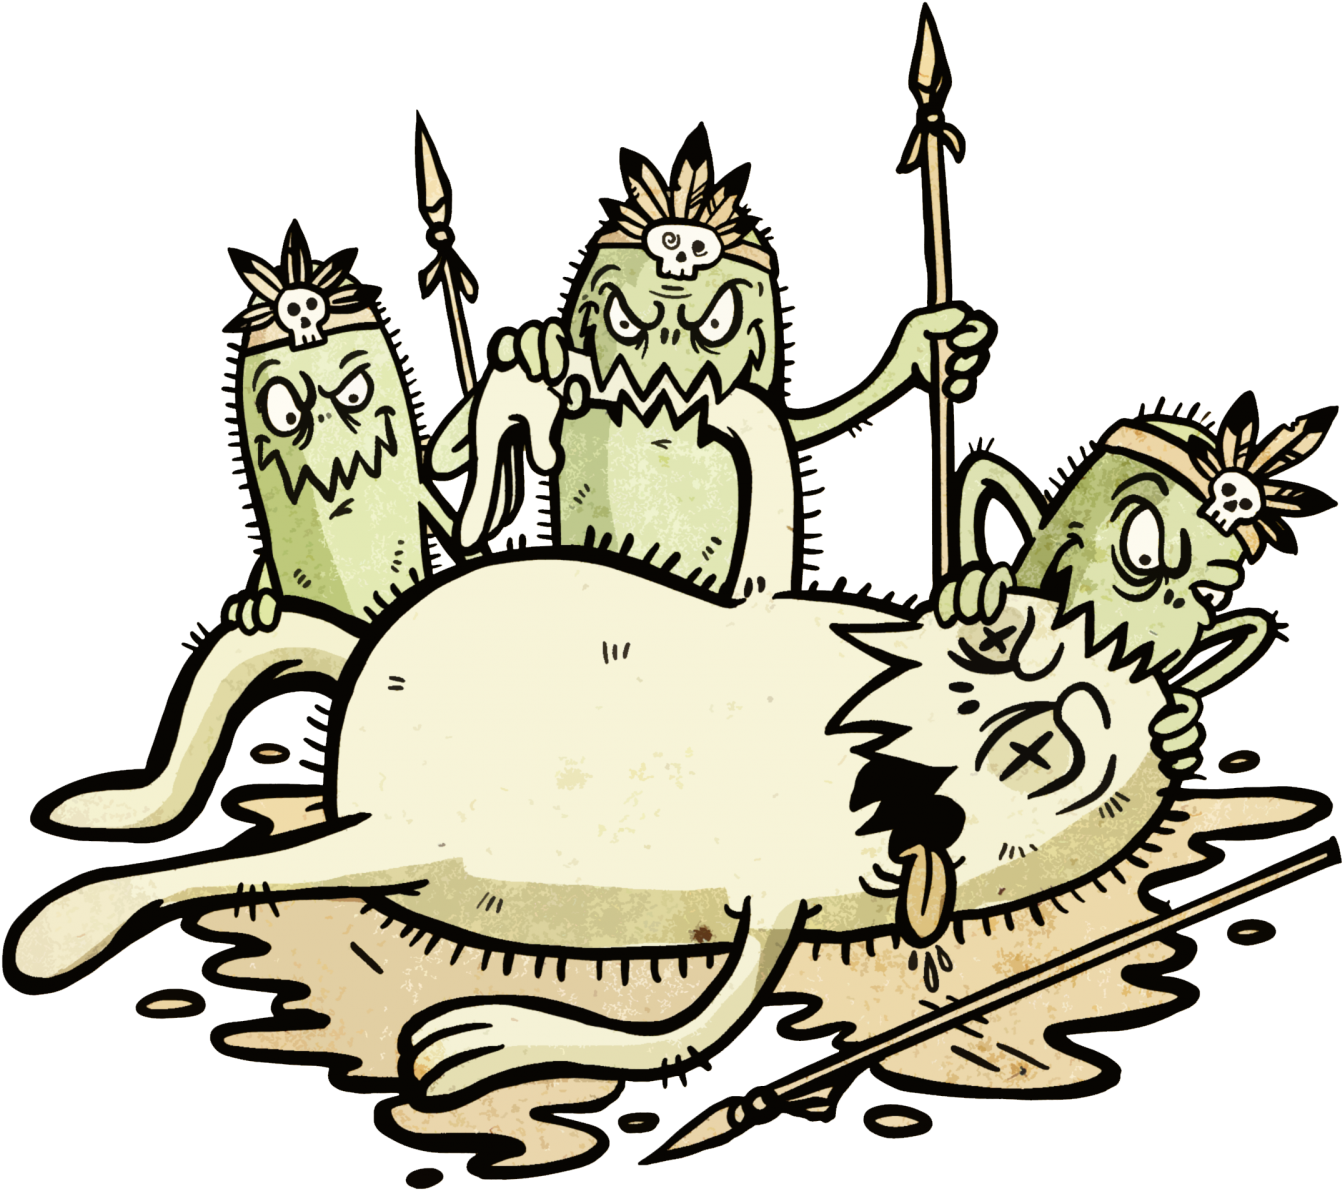 Cartoon Of A Animal With Several Small Monsters